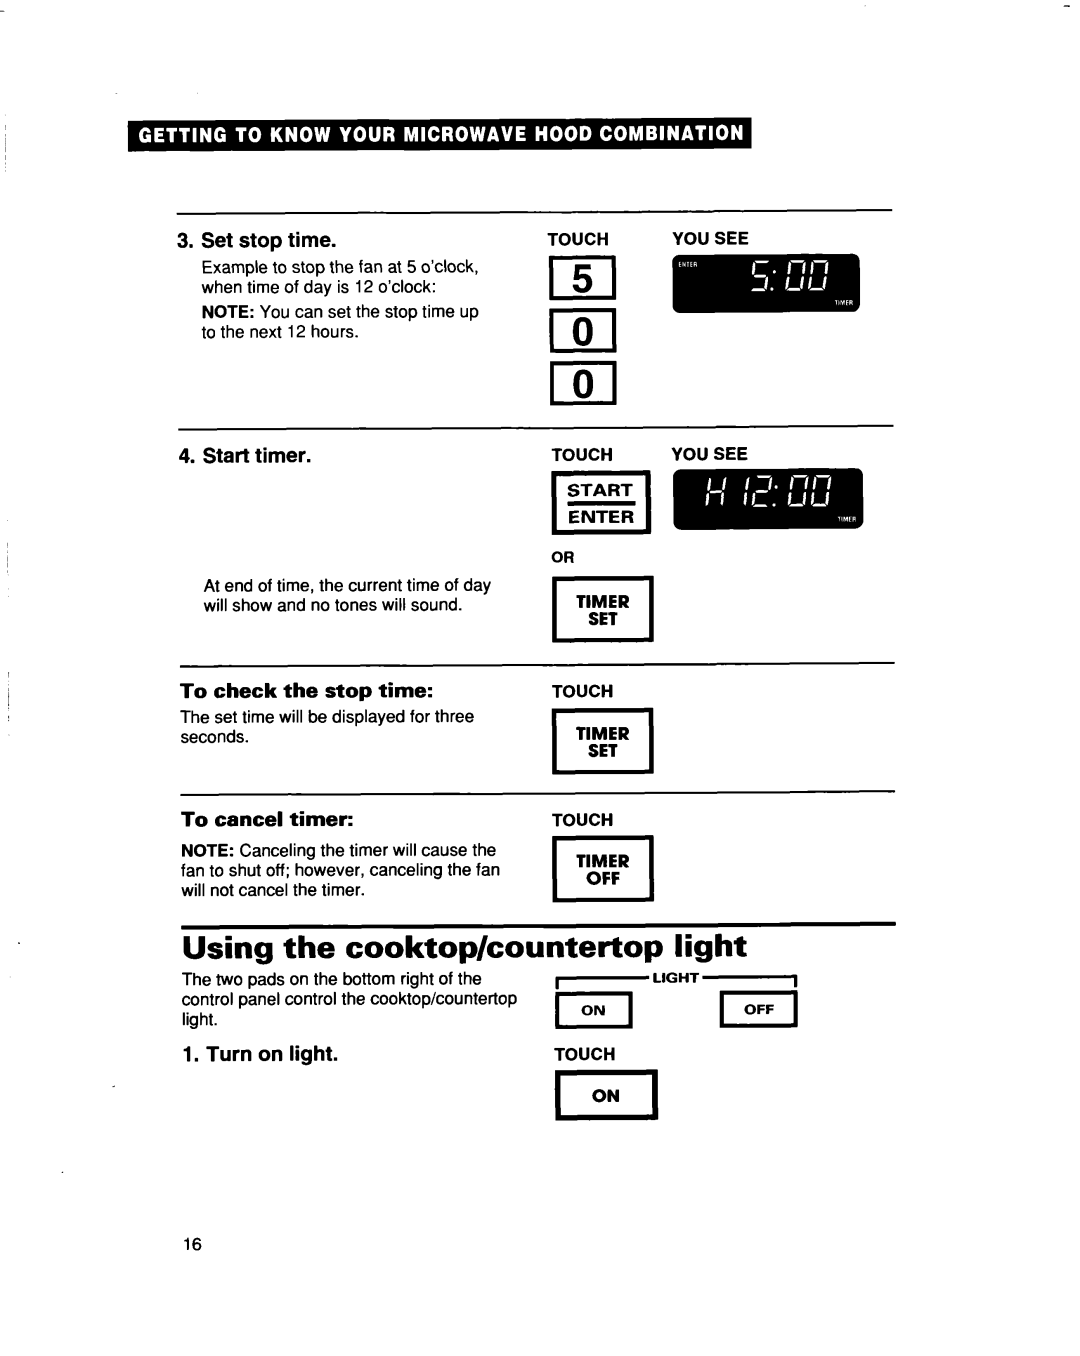 Whirlpool MHEI IRD Using the cooktop/countertop light, Set stoD. time, Start timer, To check the stop time, Turn, Touch 